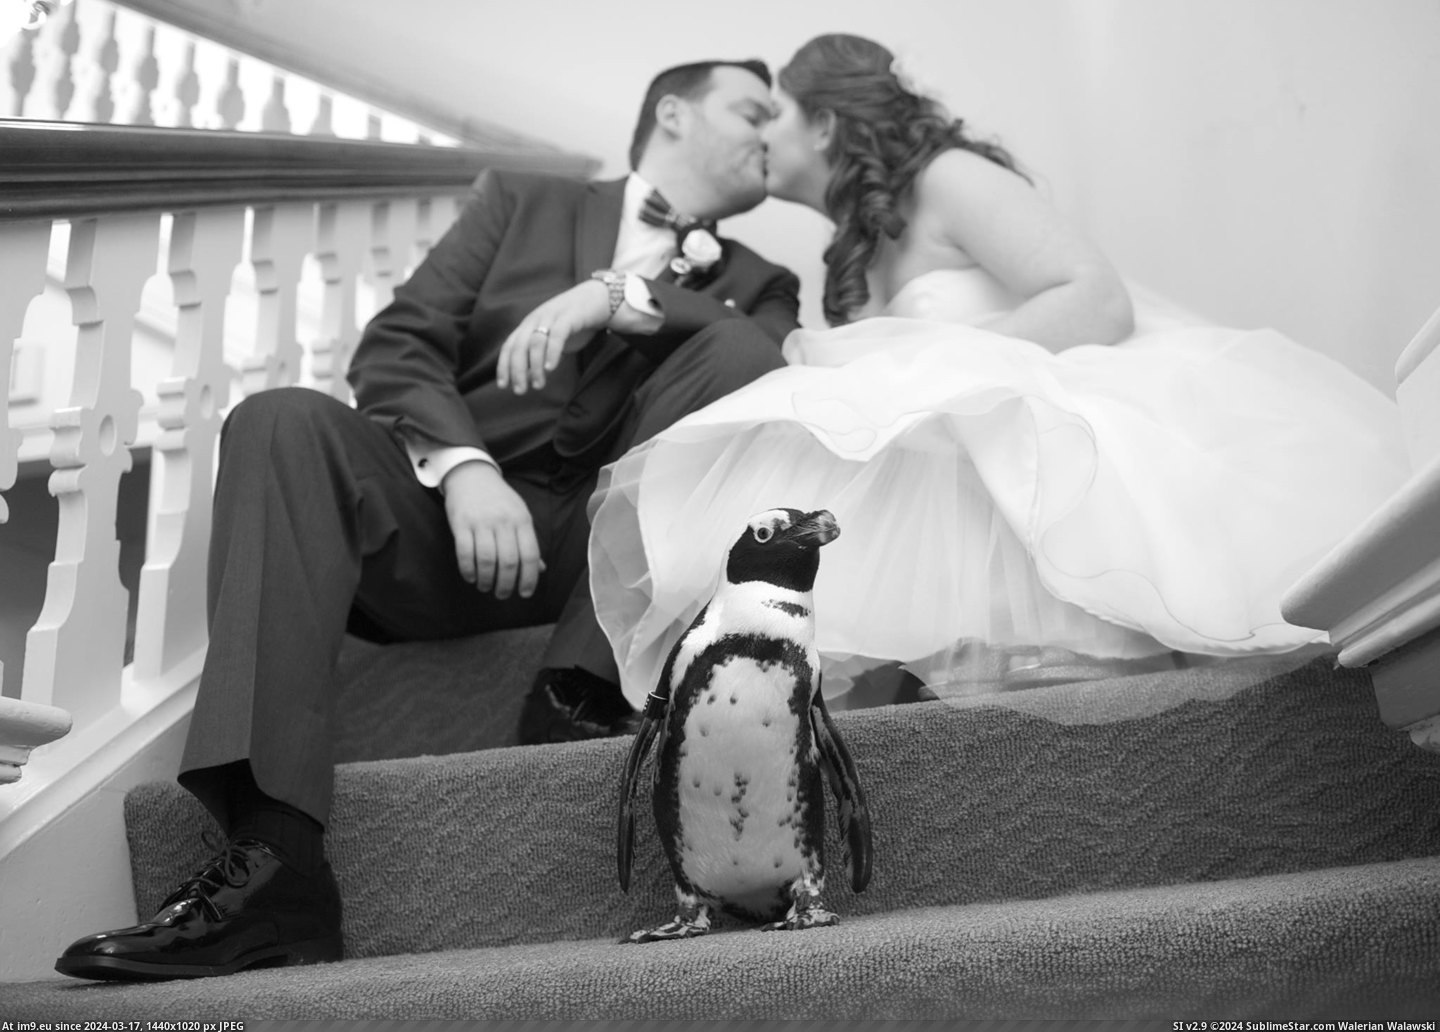 #For #Day #Picture #Wedding #Married #Penguin #Attended #Ago #Cake #Our [Aww] For my cake day, here is a picture of us and the PENGUIN that attended our wedding. We were married 10 days ago! Pic. (Изображение из альбом My r/AWW favs))